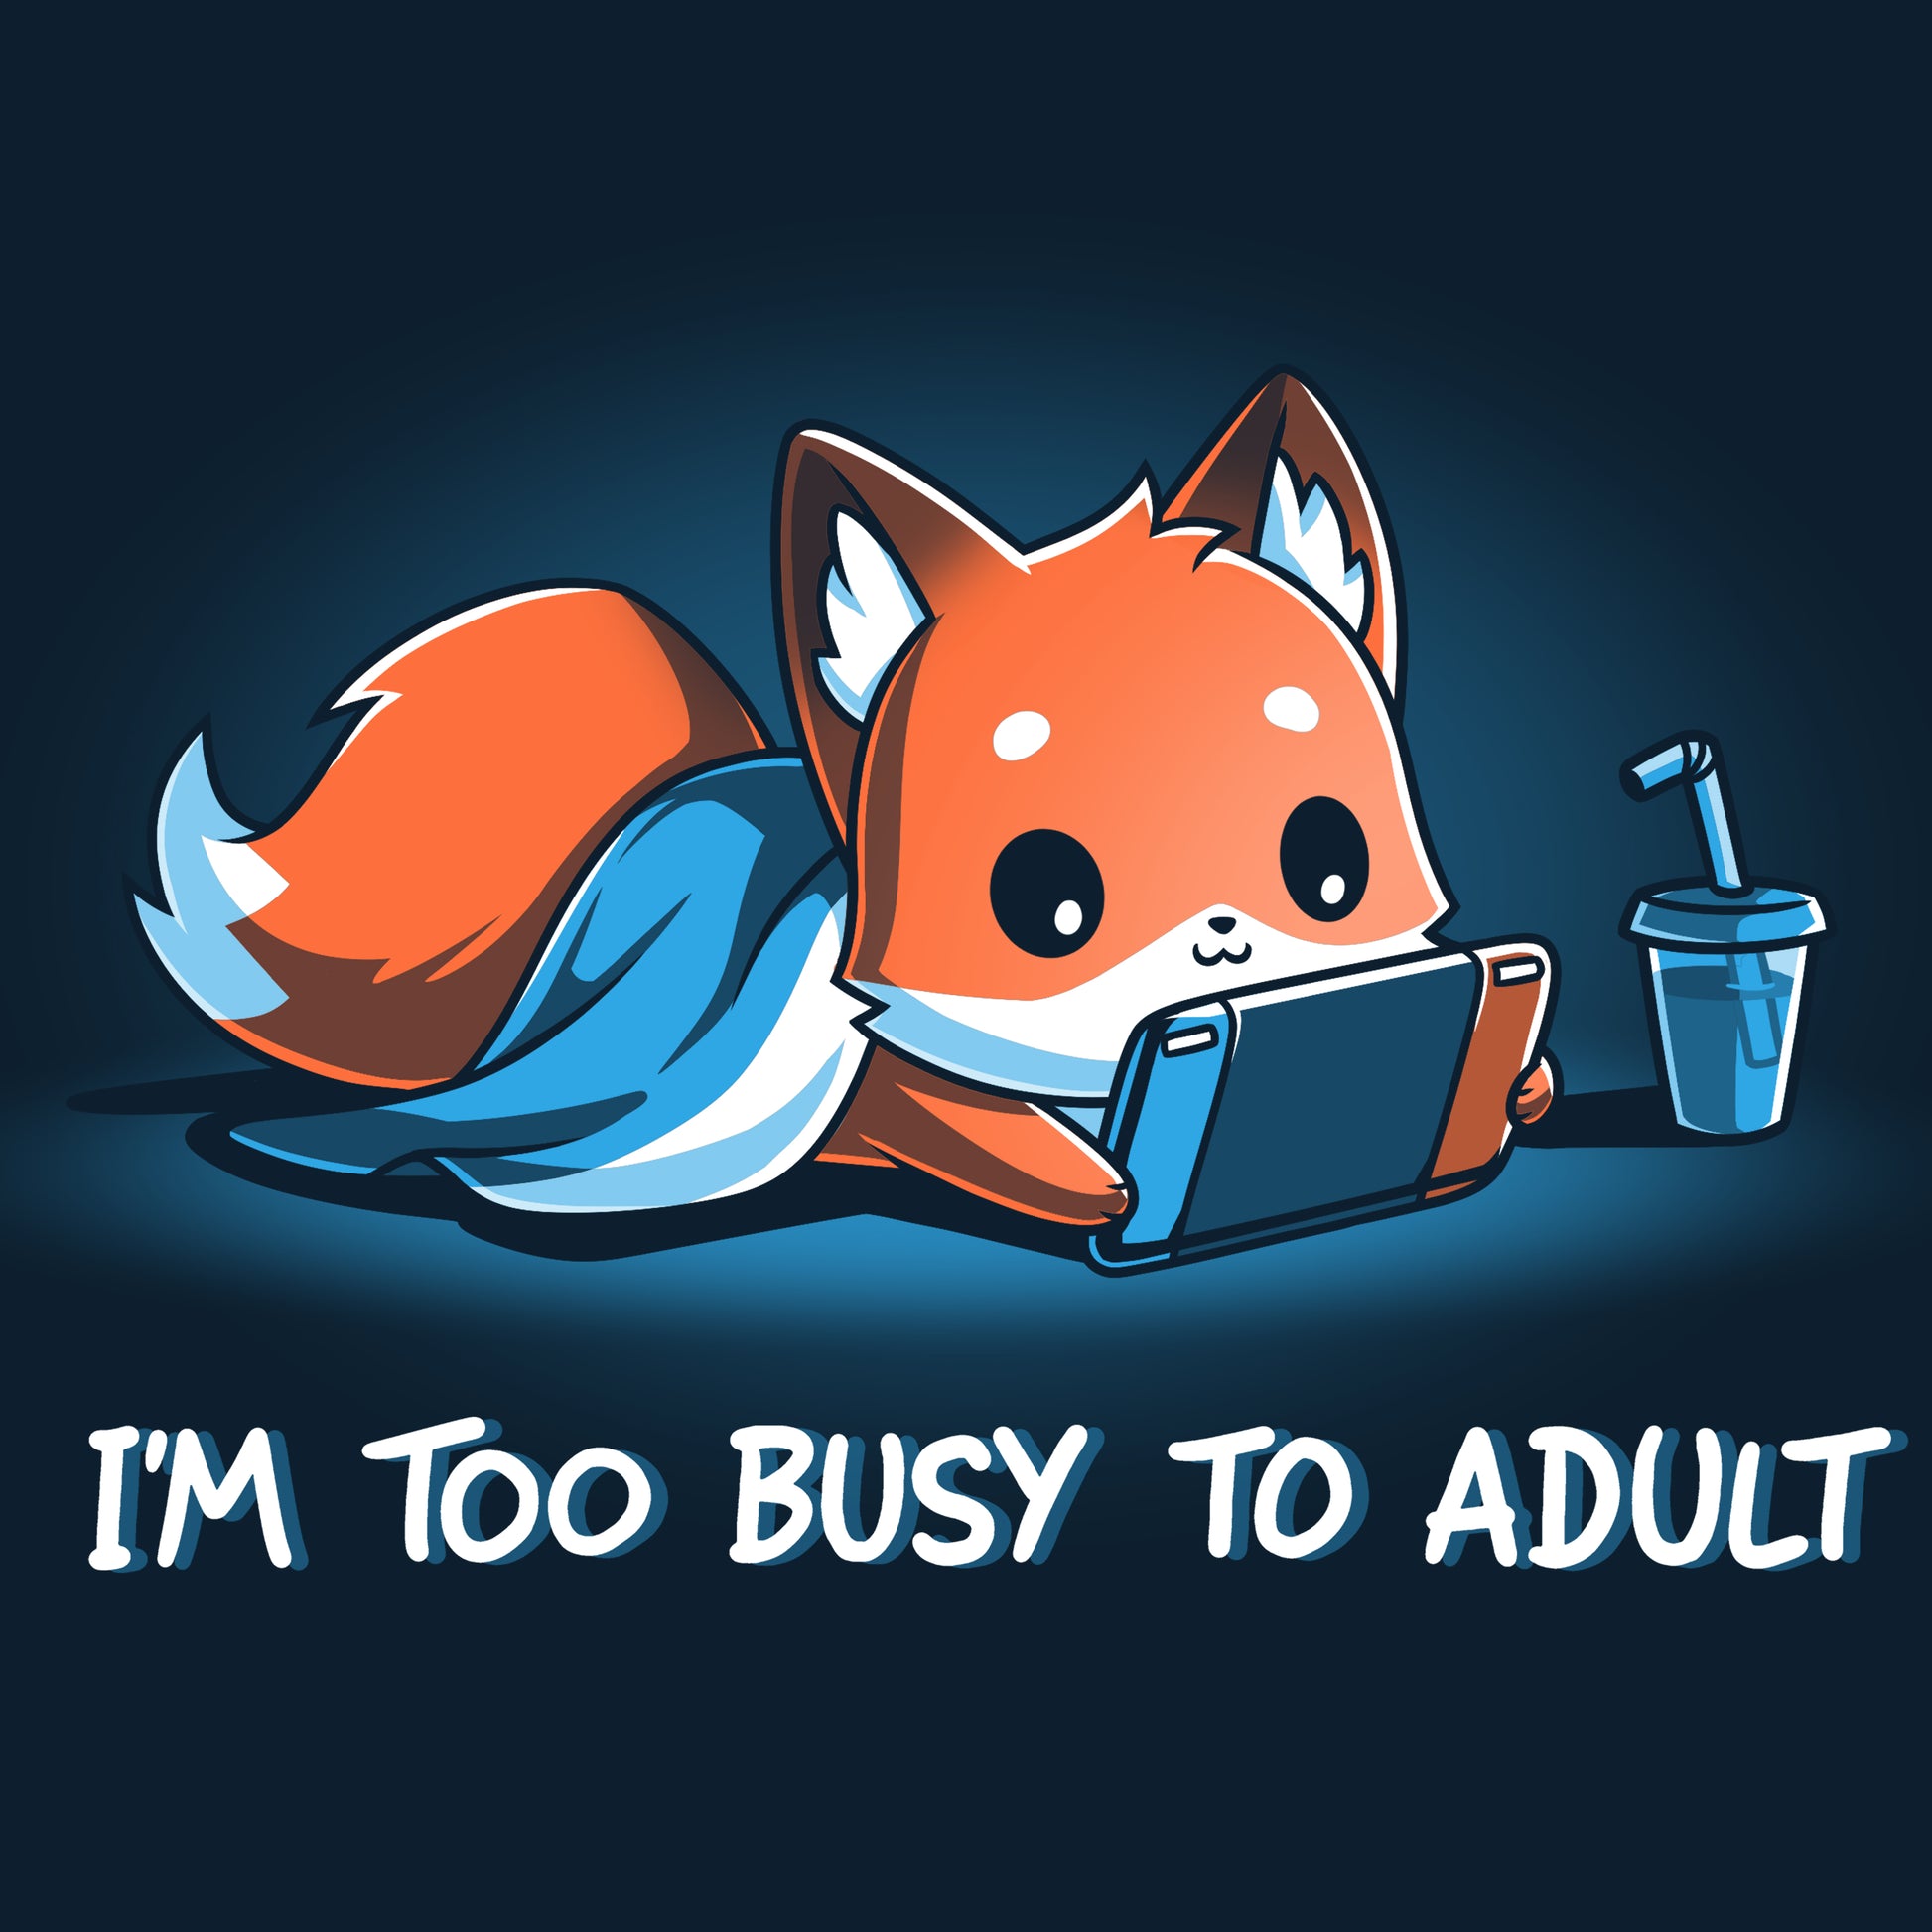 Lazy side unleashed in TeeTurtle's "I'm Too Busy to Adult" Navy Blue T-shirt.